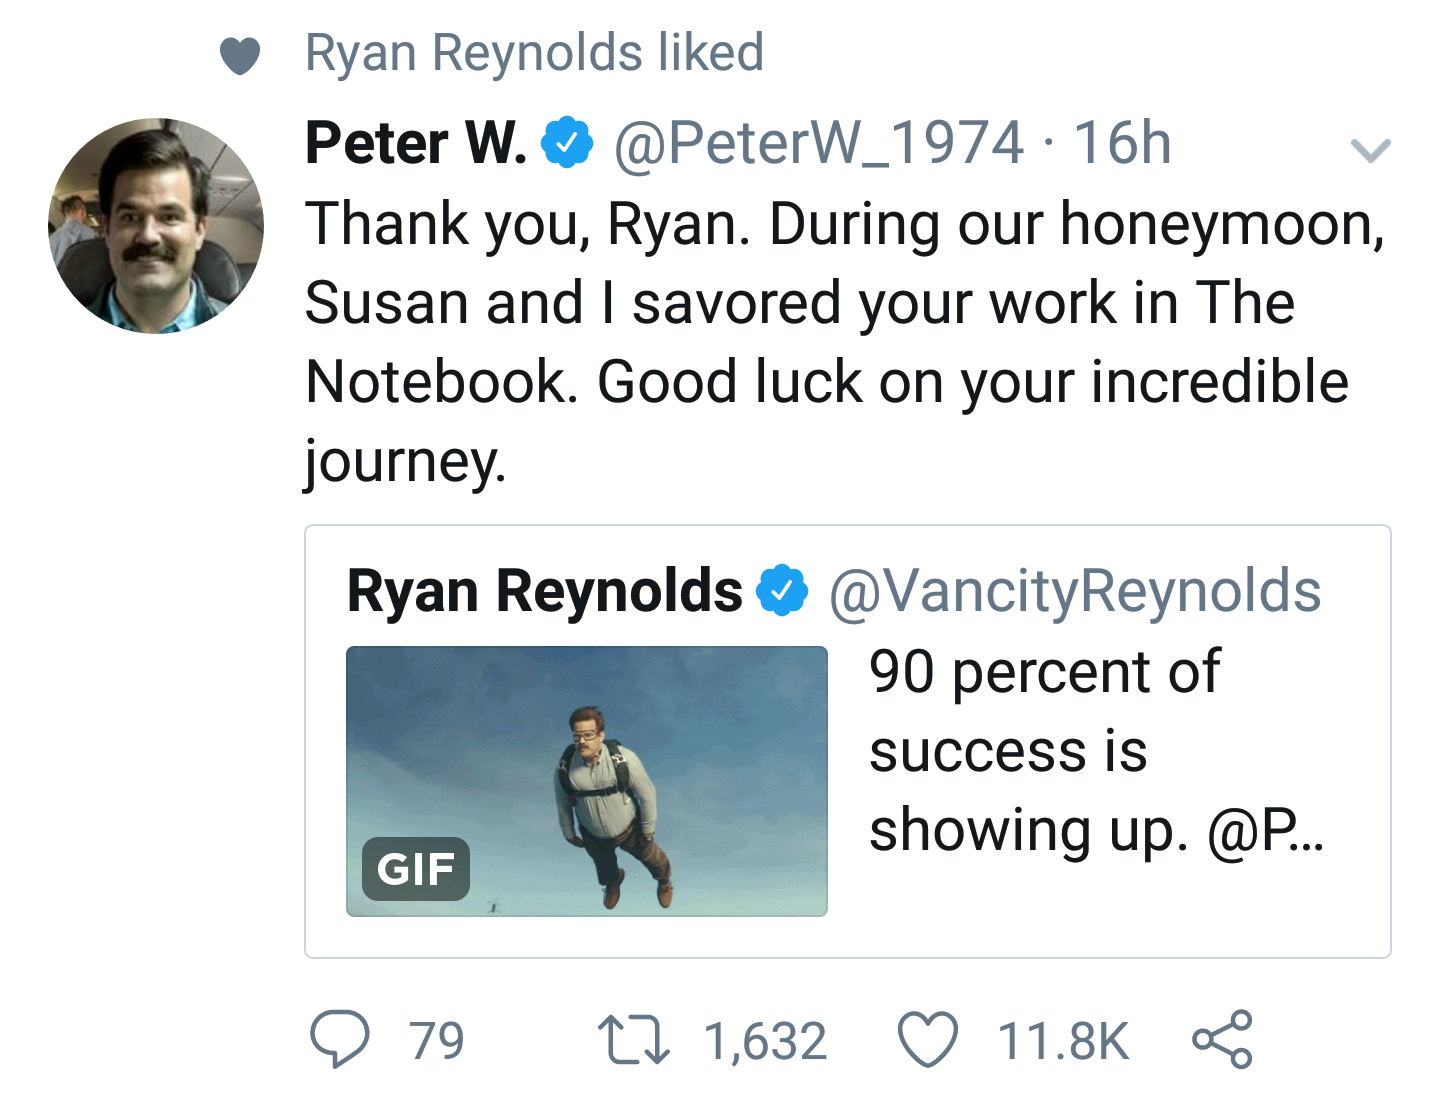 tweet - ryan reynolds twitter peter - Ryan Reynolds d Peter W. 16h v Thank you, Ryan. During our honeymoon, Susan and I savored your work in The Notebook. Good luck on your incredible journey. Ryan Reynolds 90 percent of success is showing up. ... Gif 9 7